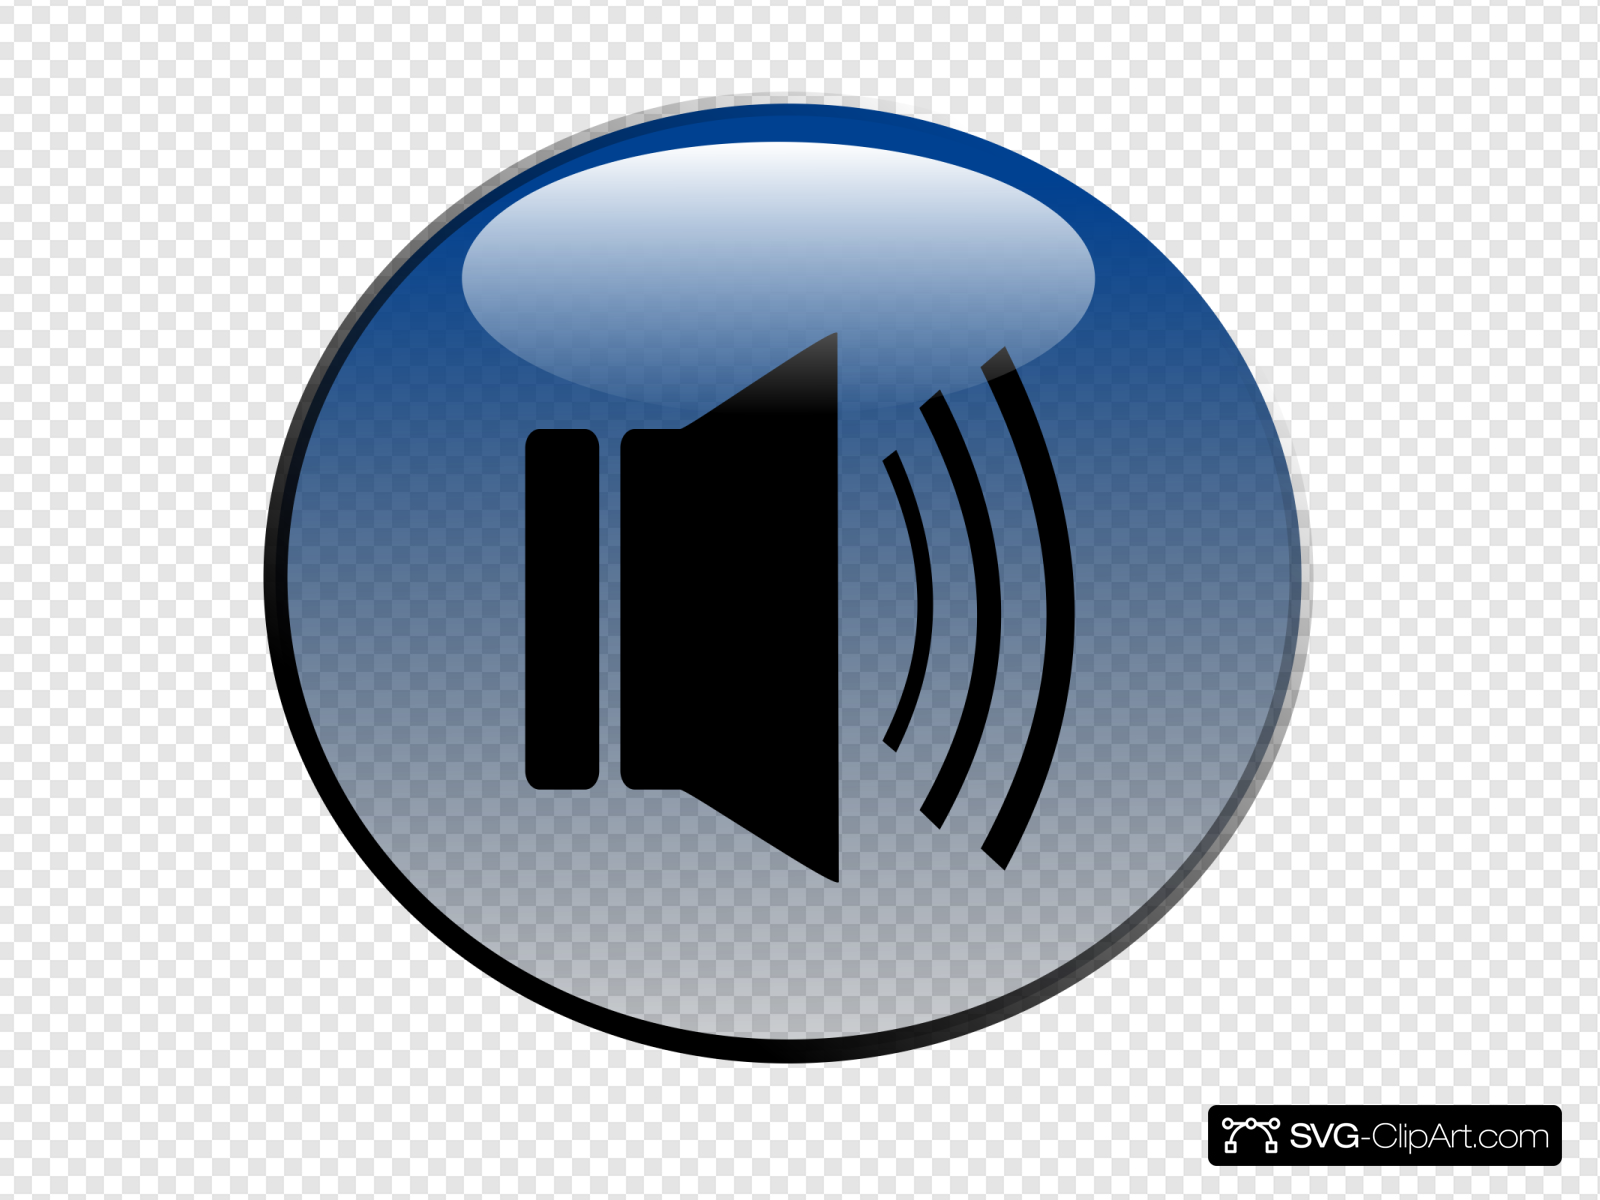 Audio Speaker Glossy Icon Clip art, Icon and SVG.